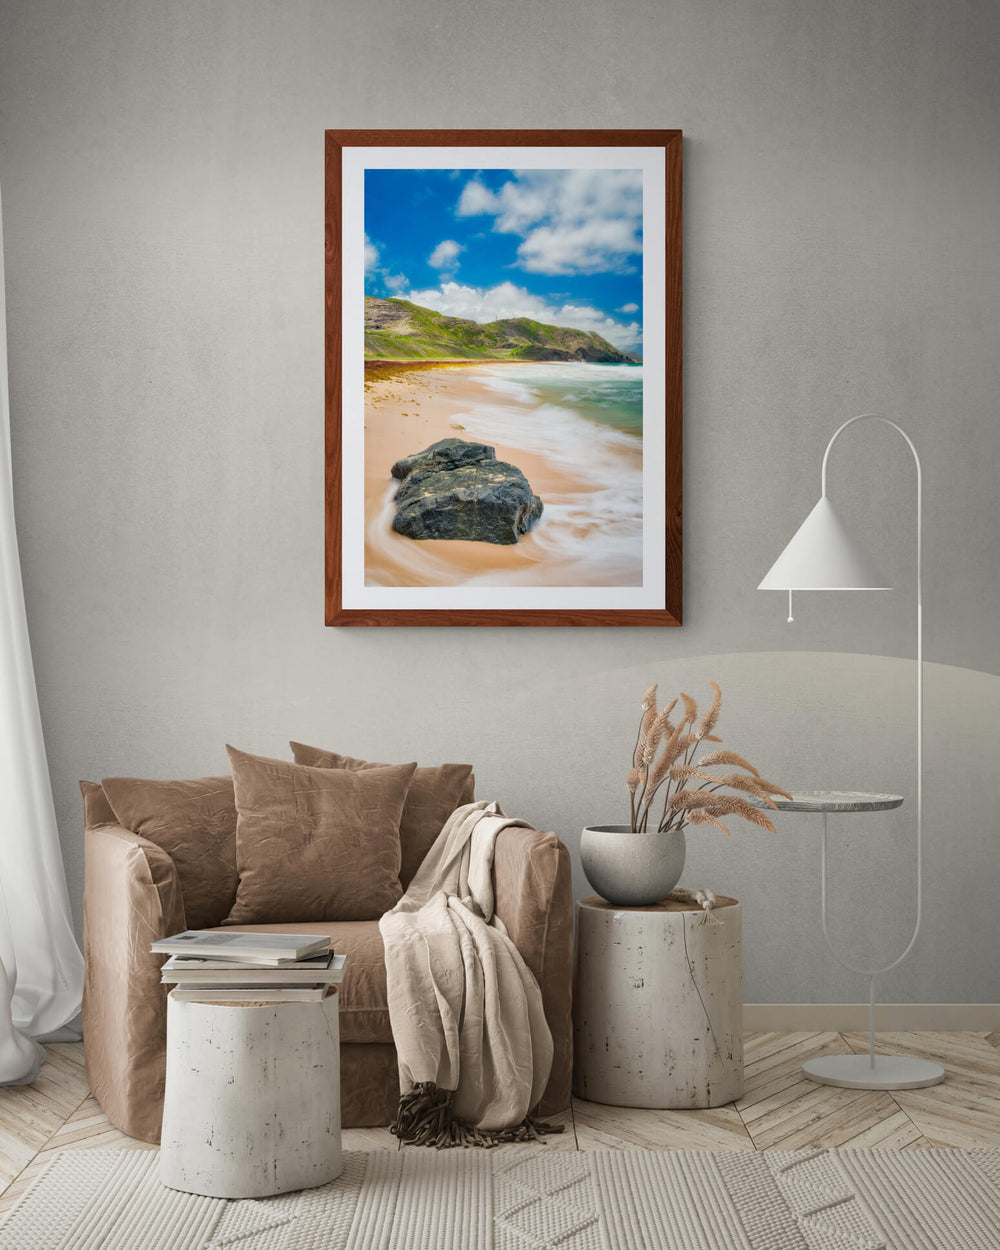 A framed art print of "North Friar's Bay I" by Yuri A Jones on a gray wall, hung above a brown armchair.